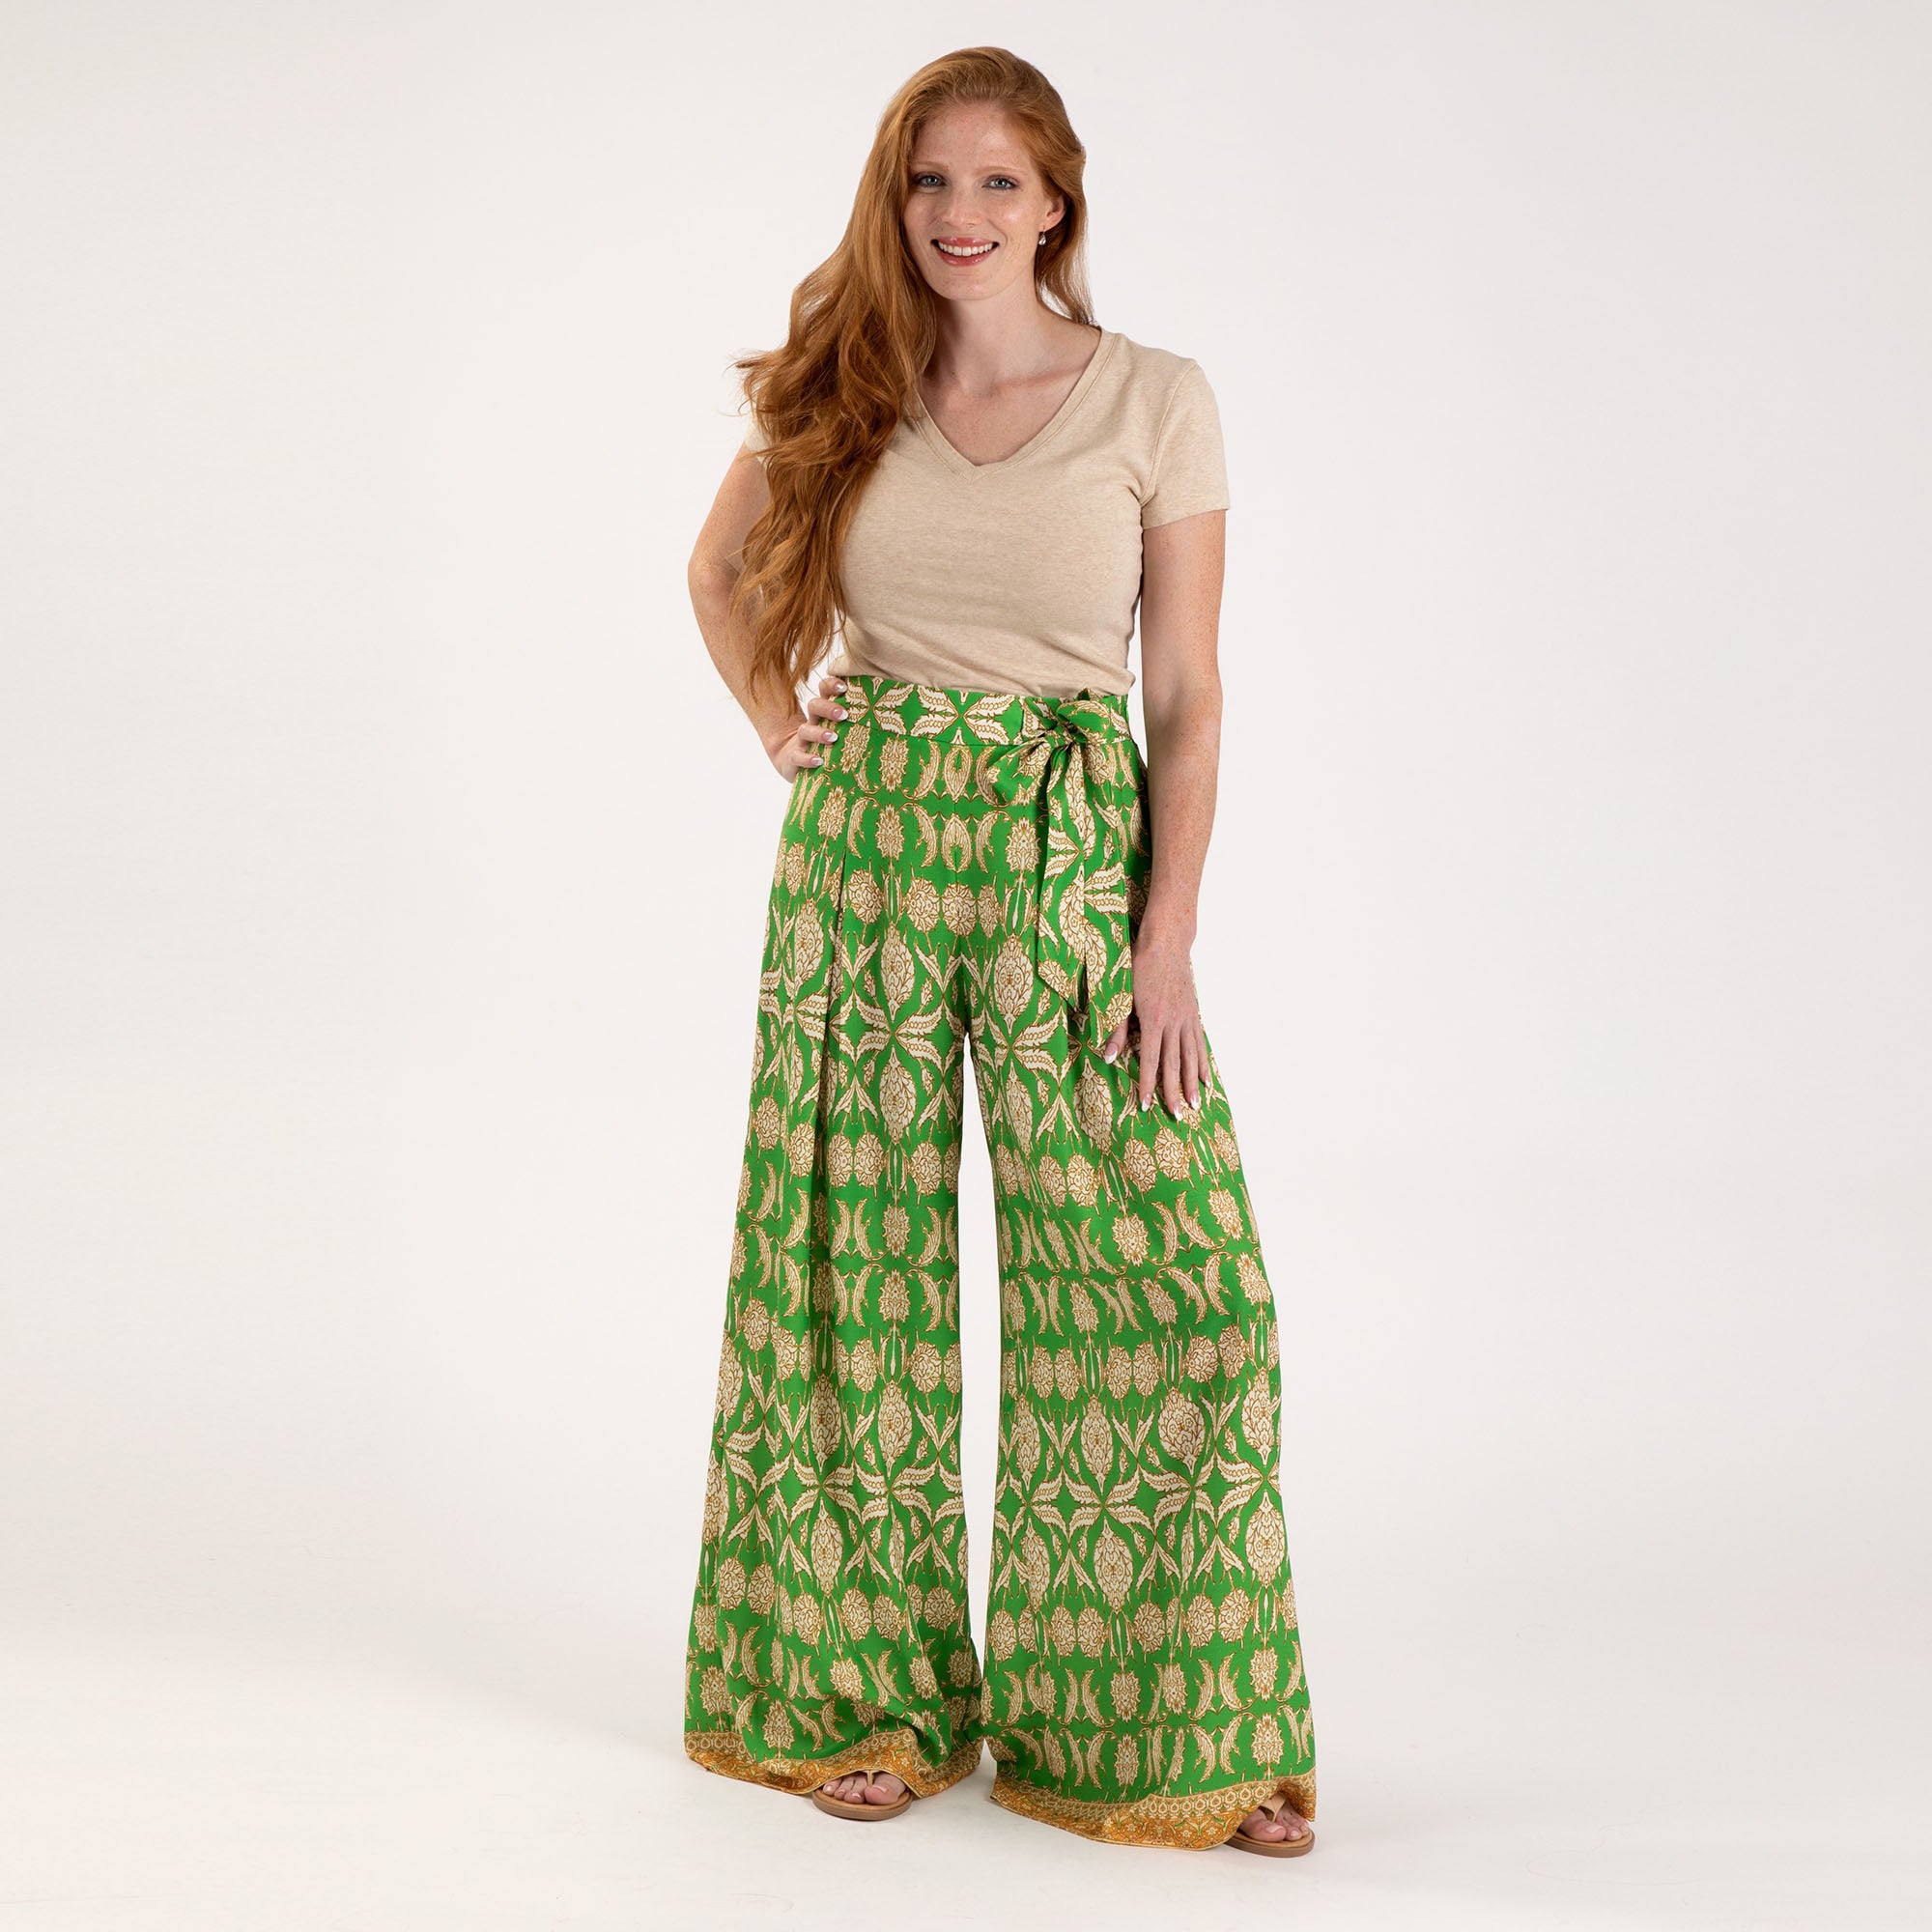 Concentric Design Flowing Pants - Green - M